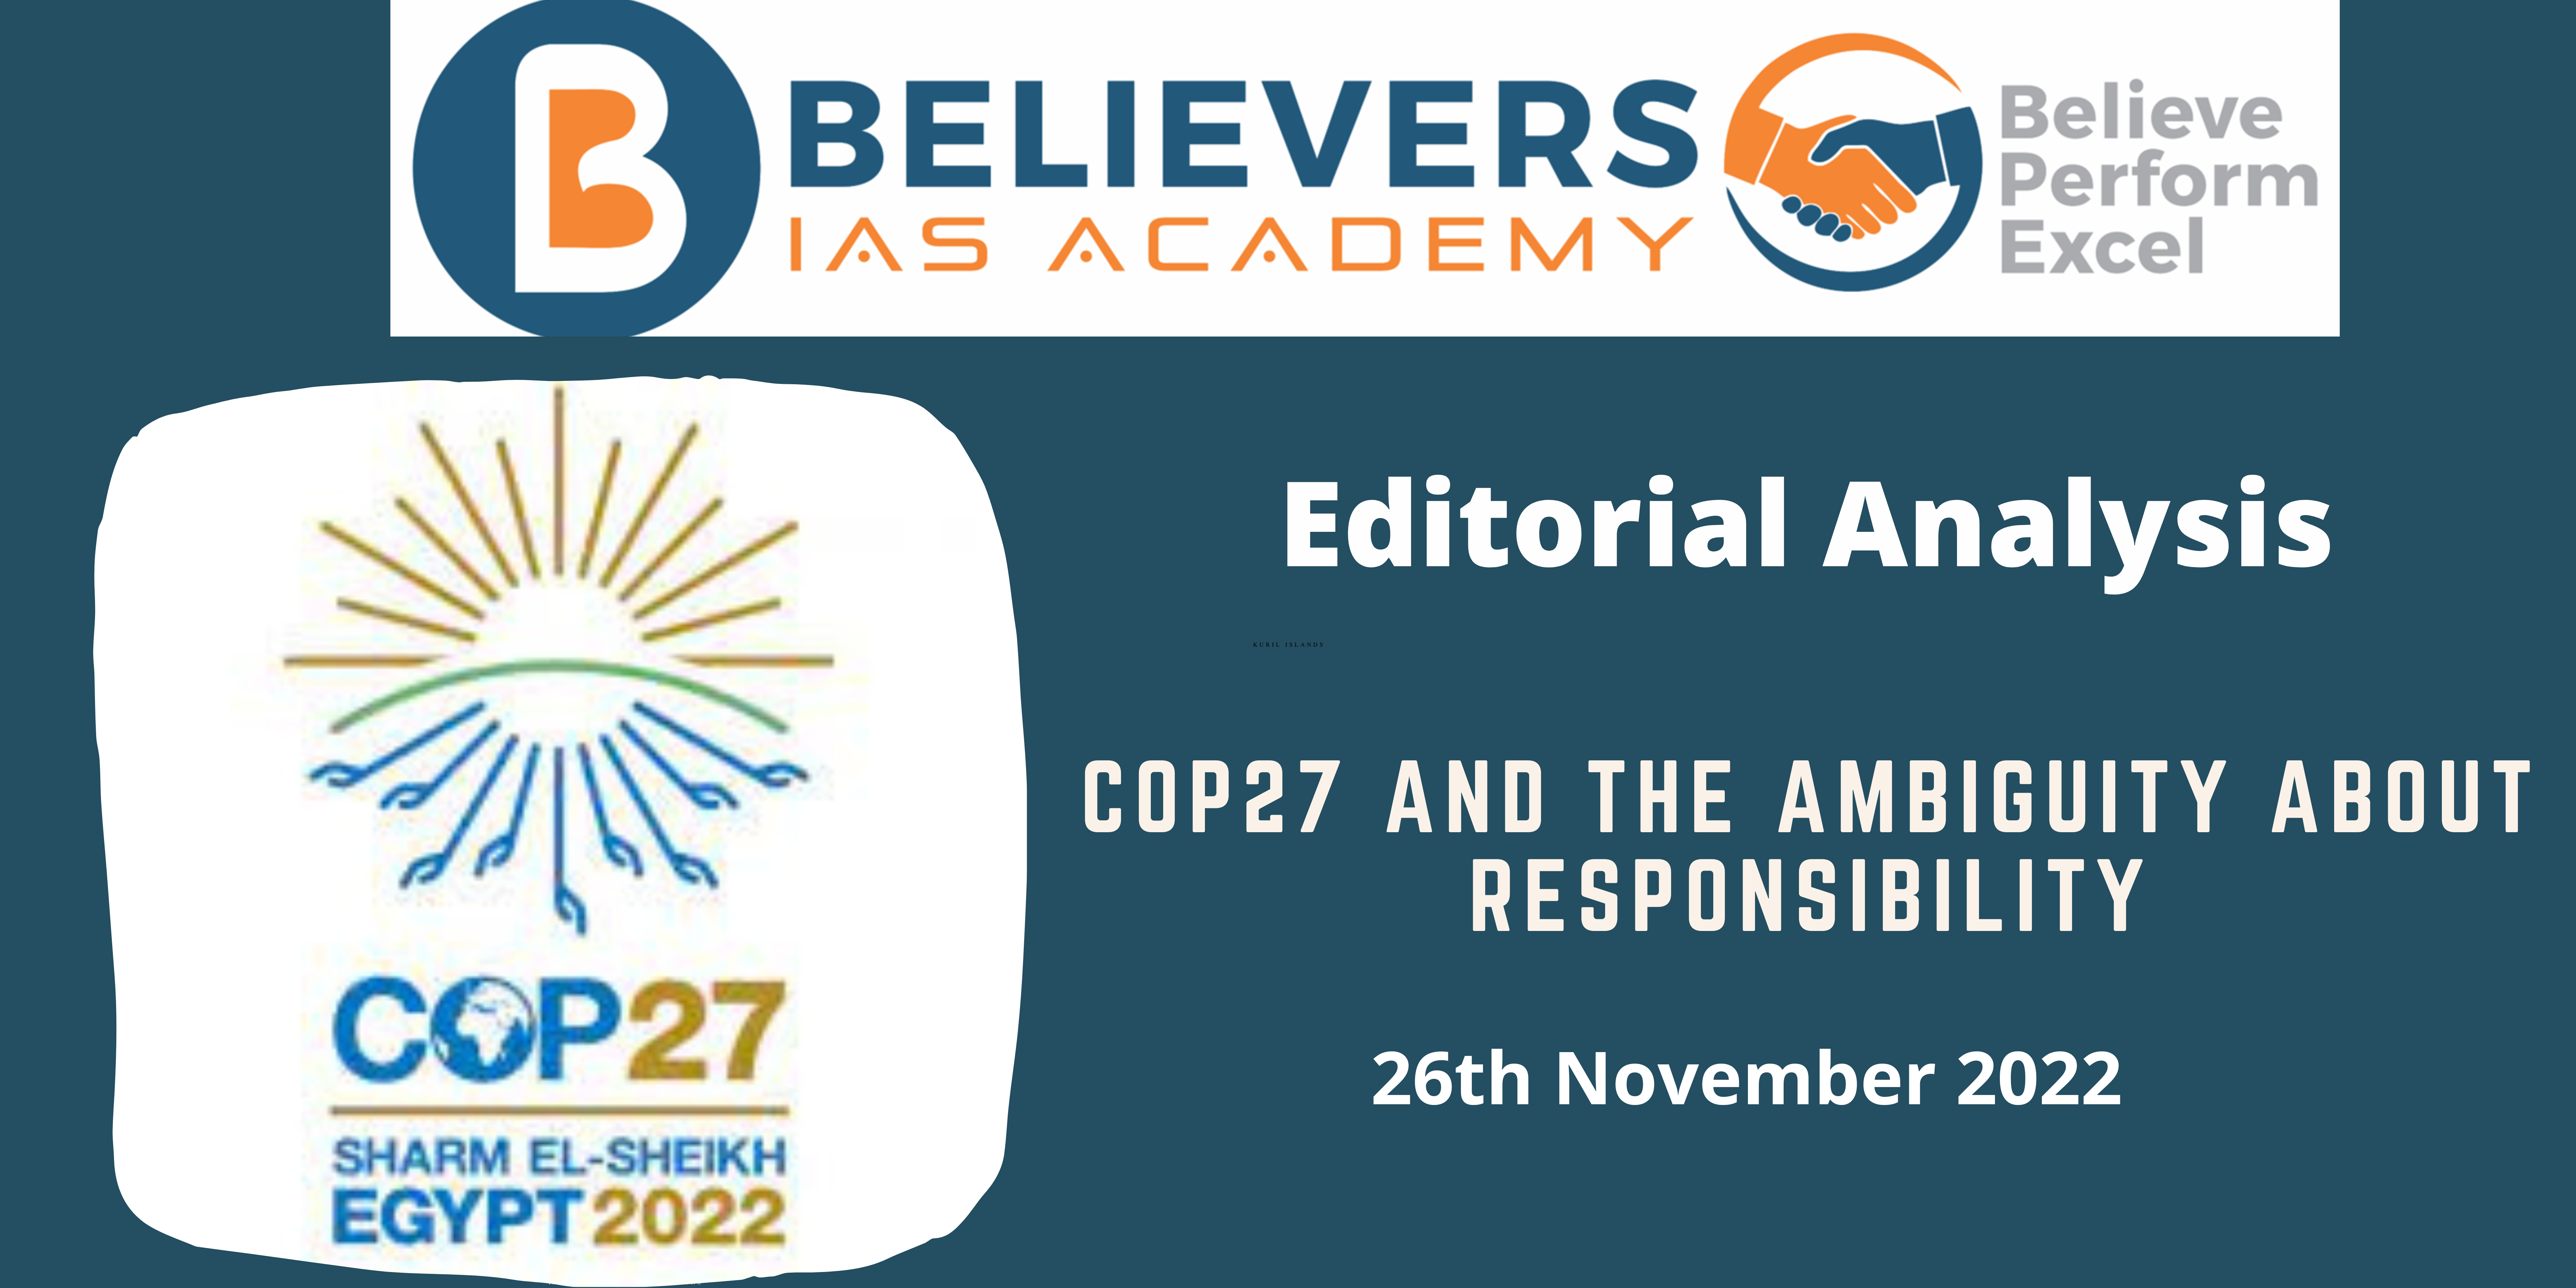 COP27 and the ambiguity about responsibility